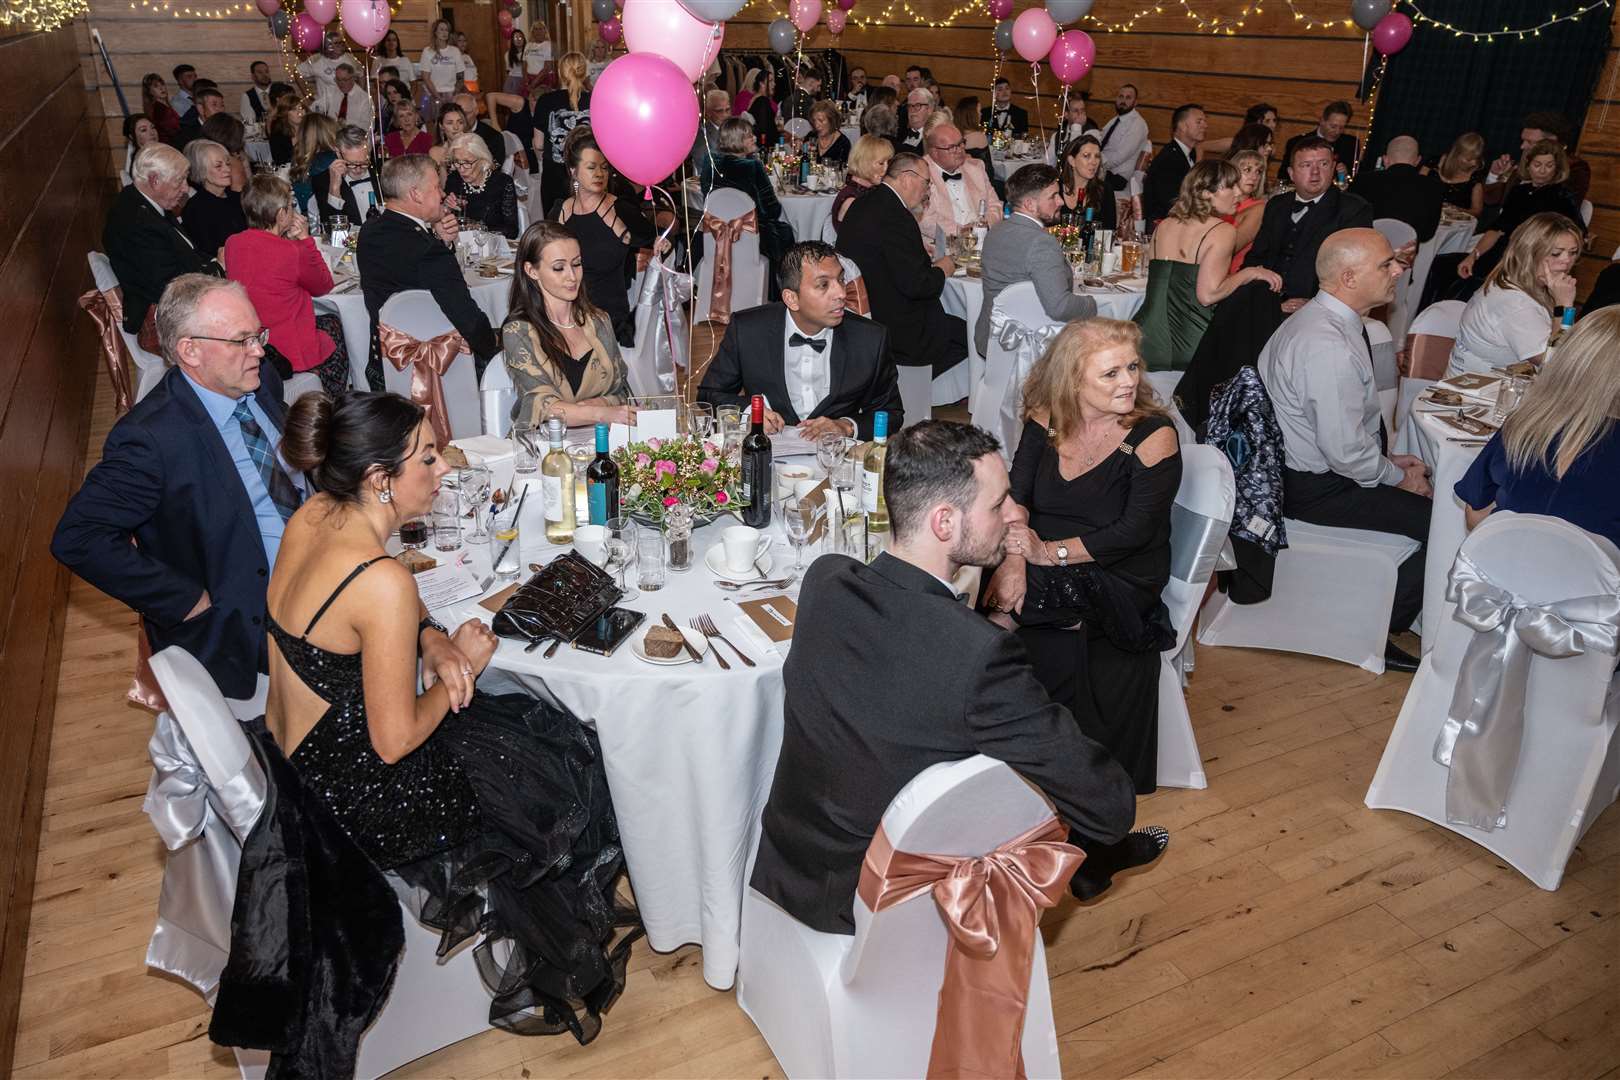 Inchberry Hall was the perfect setting for the fundraising ball. Picture: Robbie Simpson, Isla Brig Images.